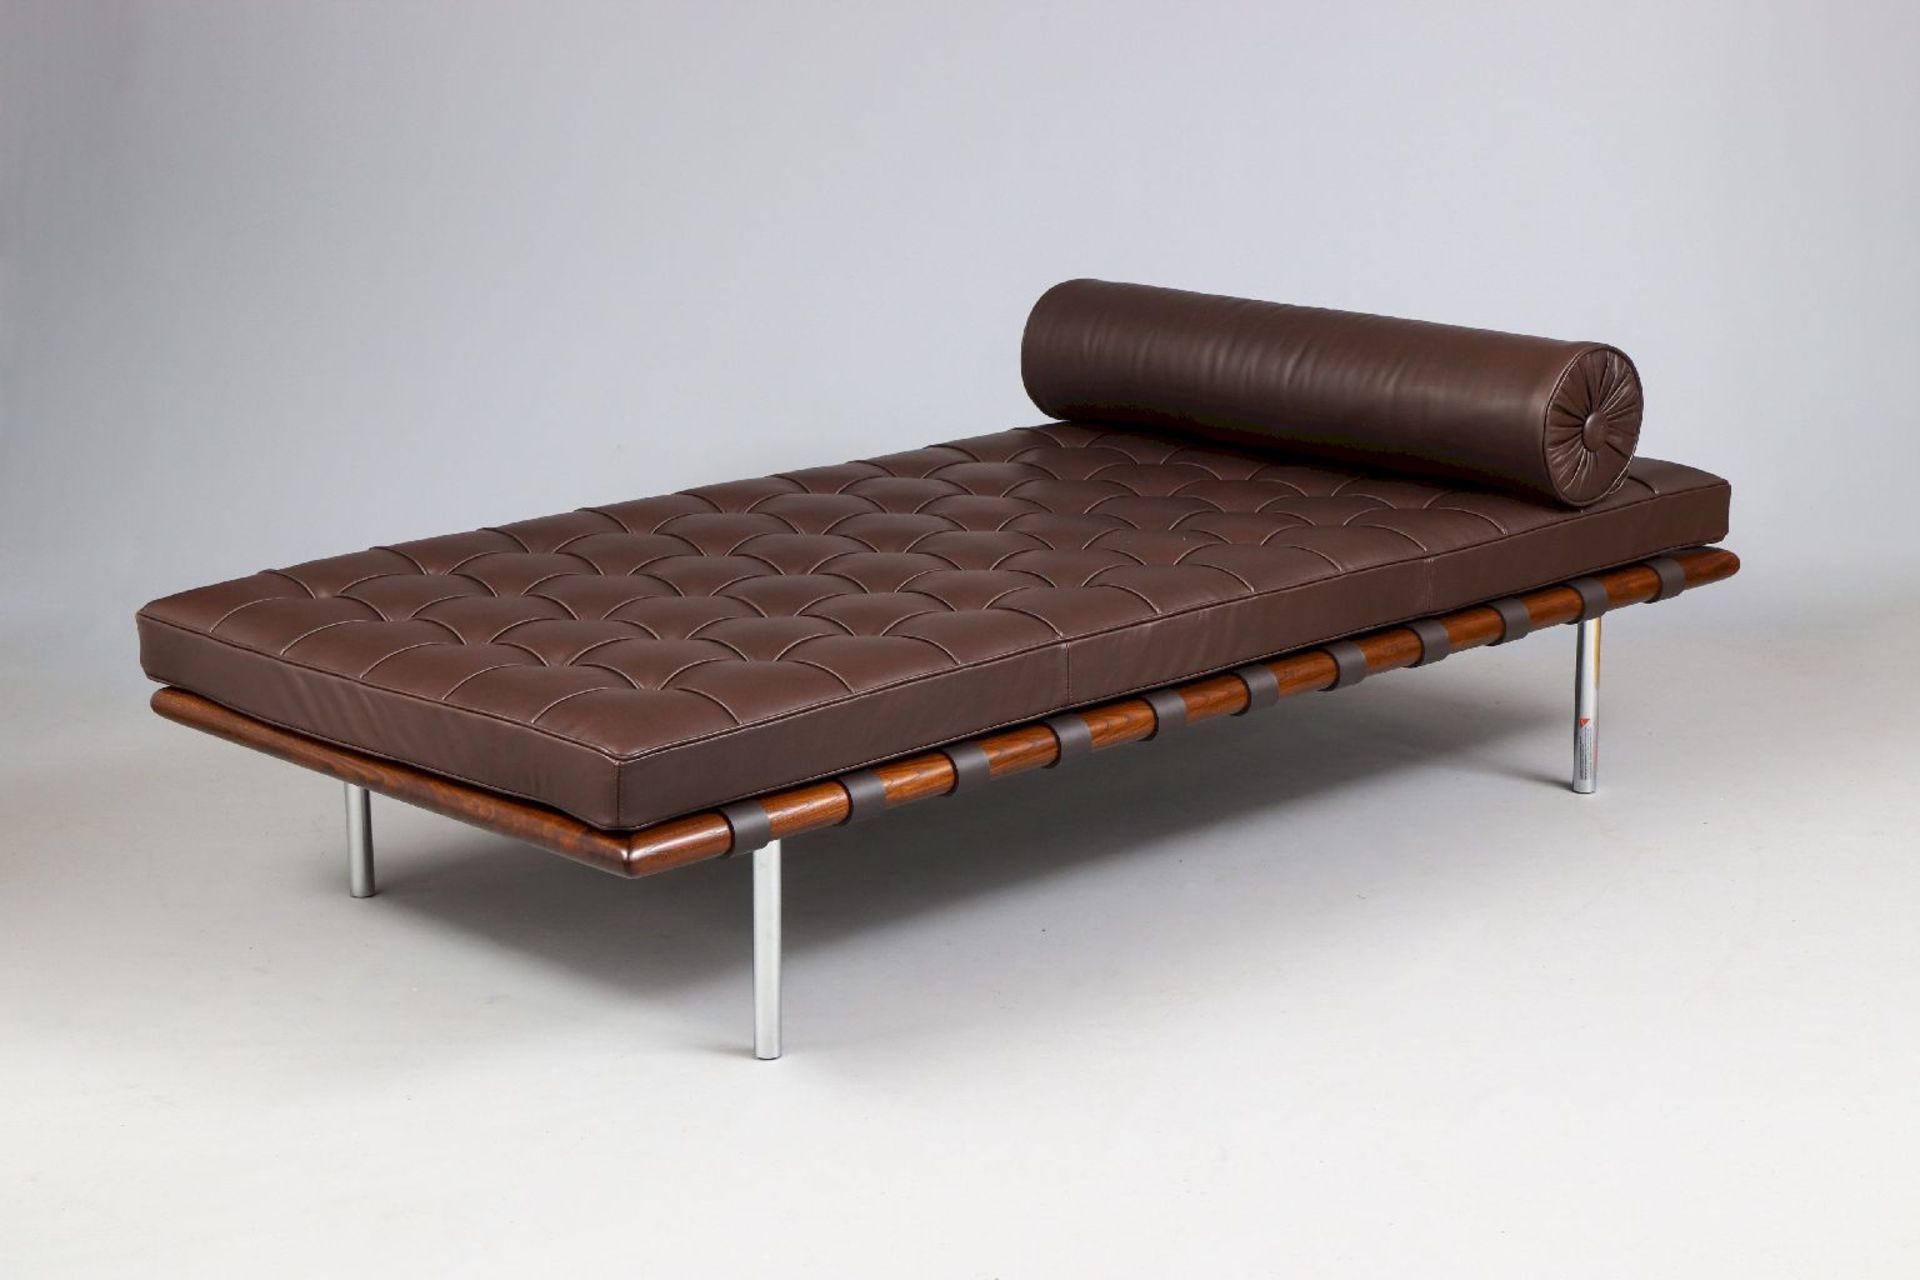 MIES VAN DER ROHE ¨Barcelona¨ Daybed - Image 2 of 5